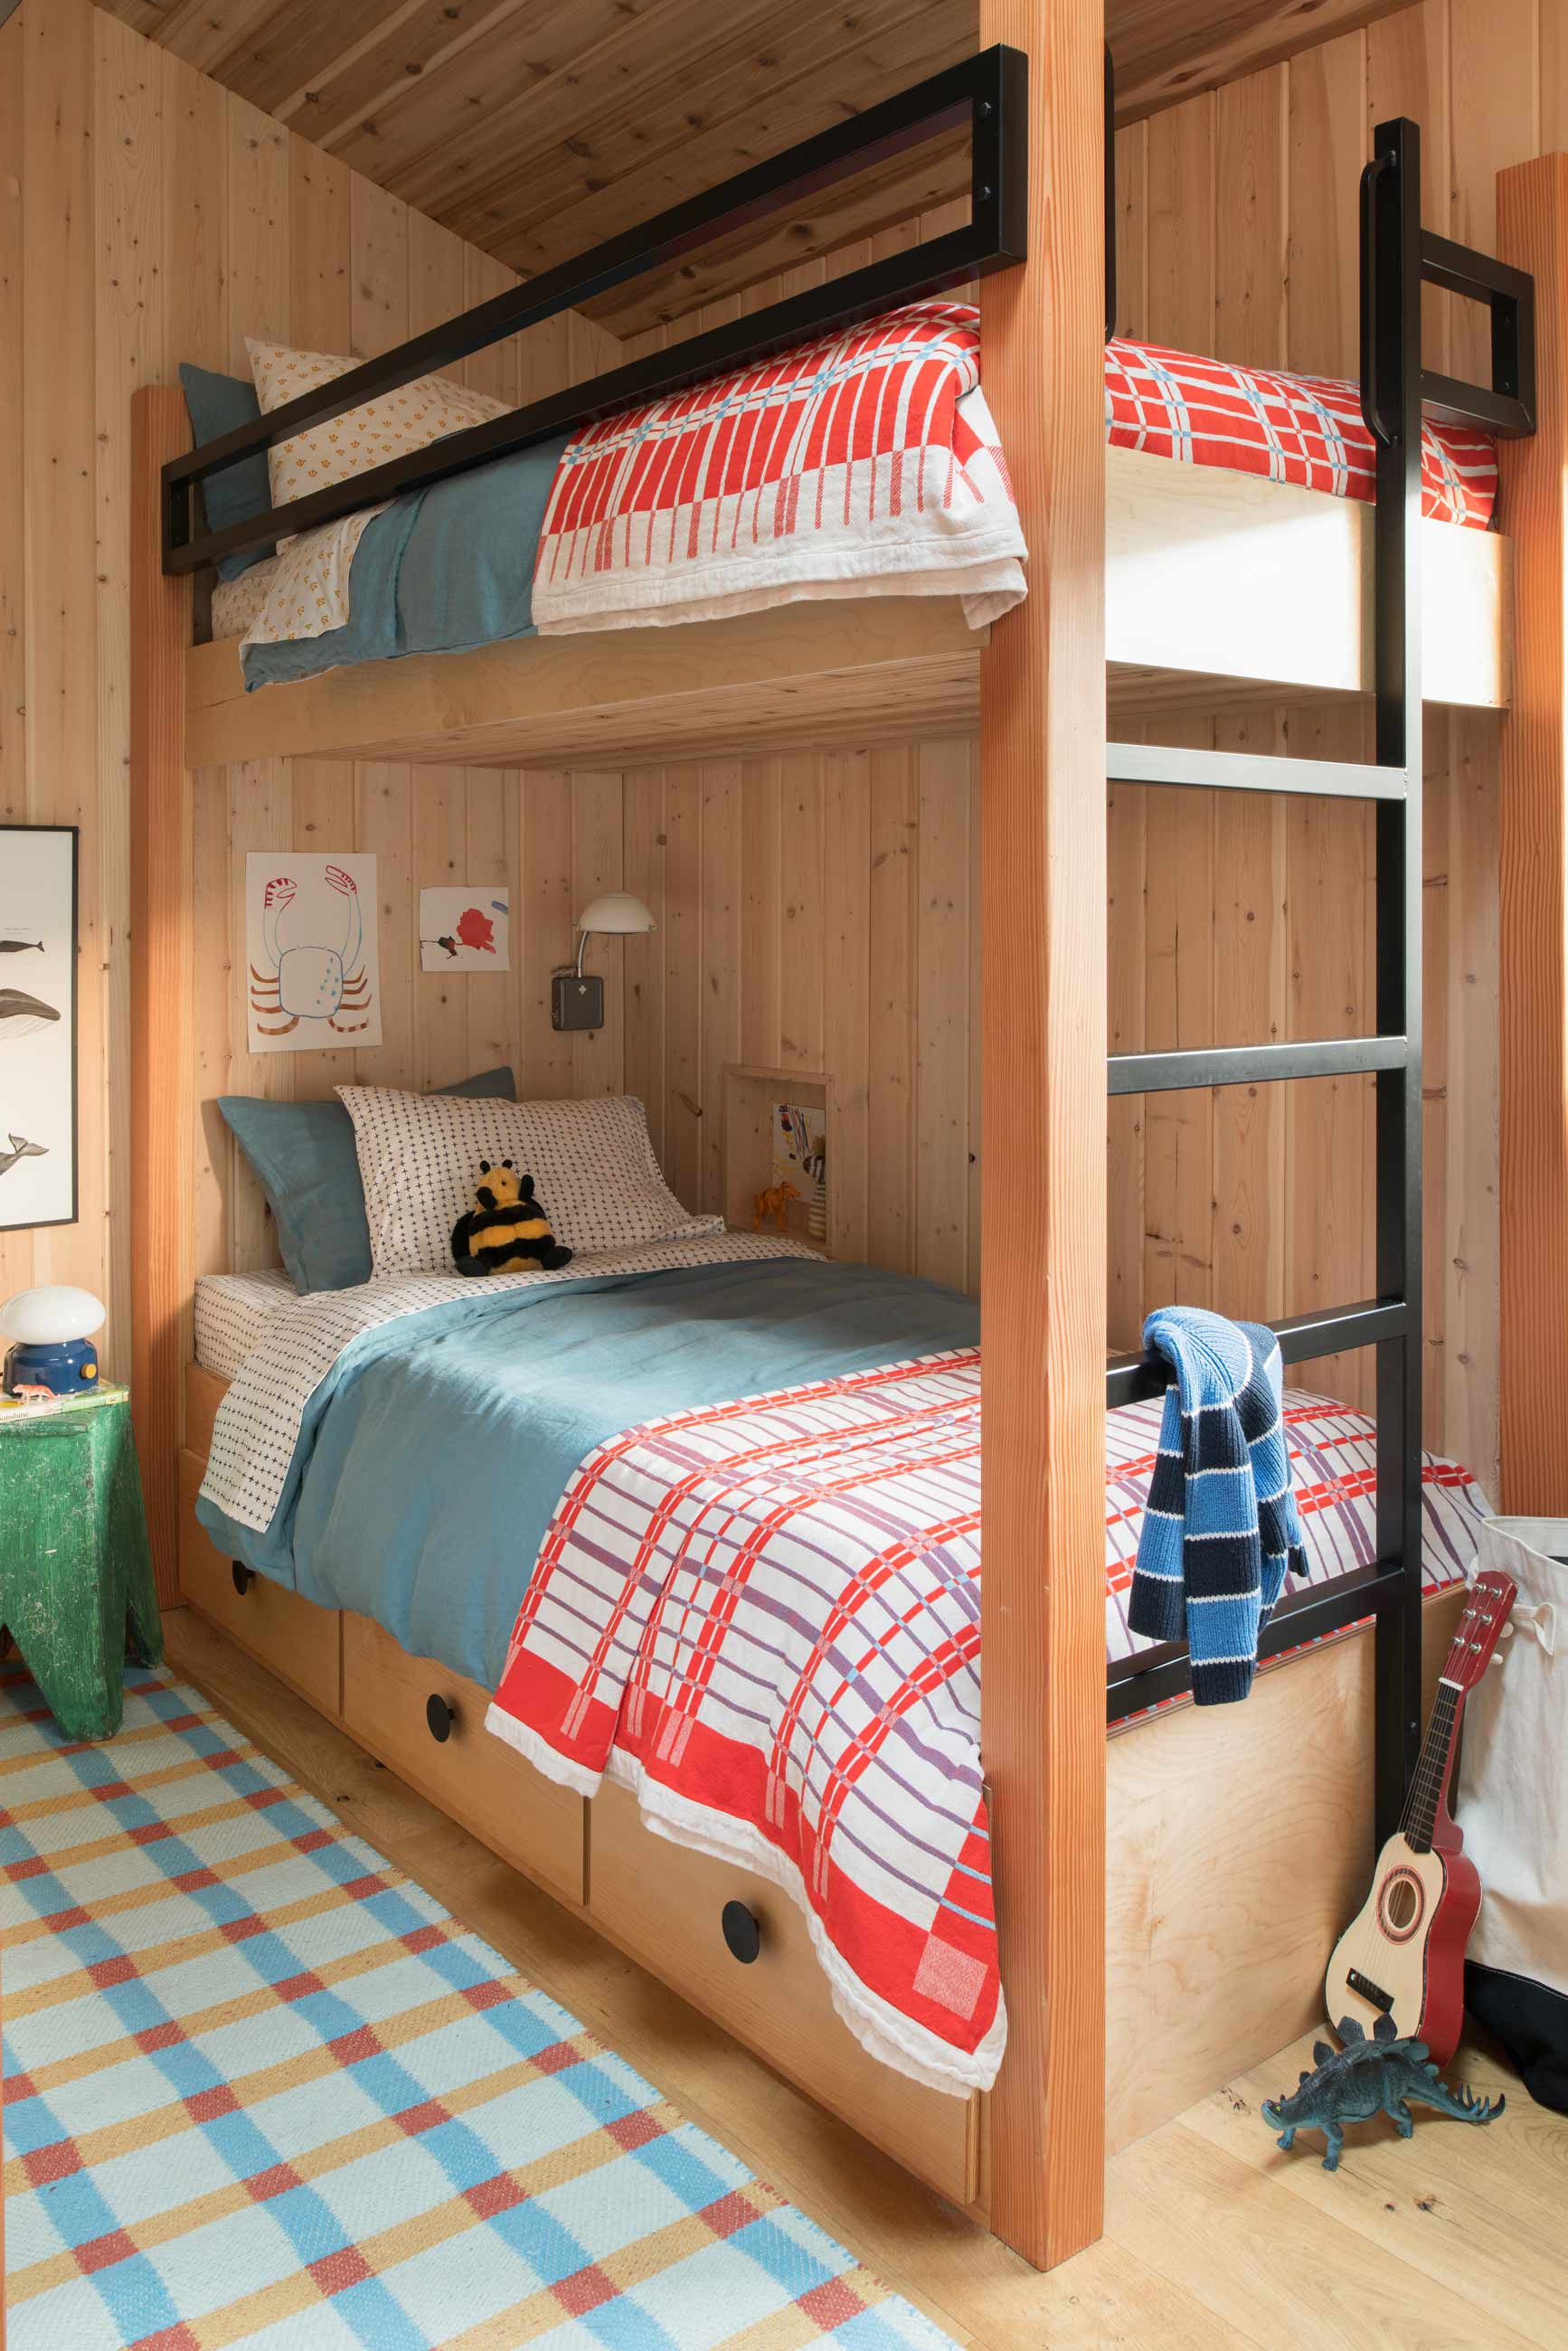 Bunk beds with quilt on top.